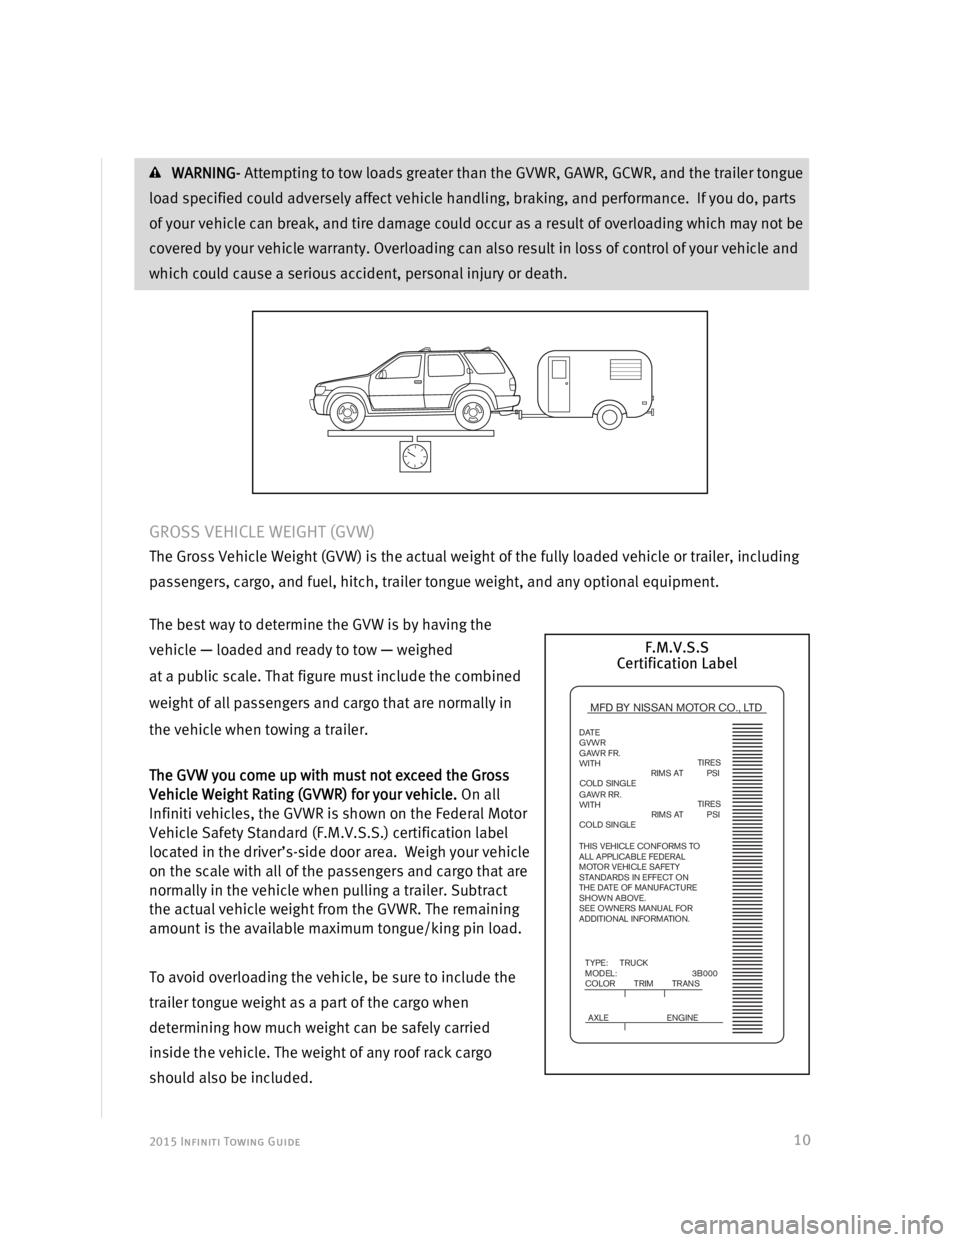 INFINITI Q70 2015  Towing Guide  2015 Infiniti Towing Guide  
 
 
10
 WARNING- Attempting to tow loads greater than the GVWR, GAWR, GCWR, and the trailer tongue 
load specified could adversely affect vehicle handling, braking, and p